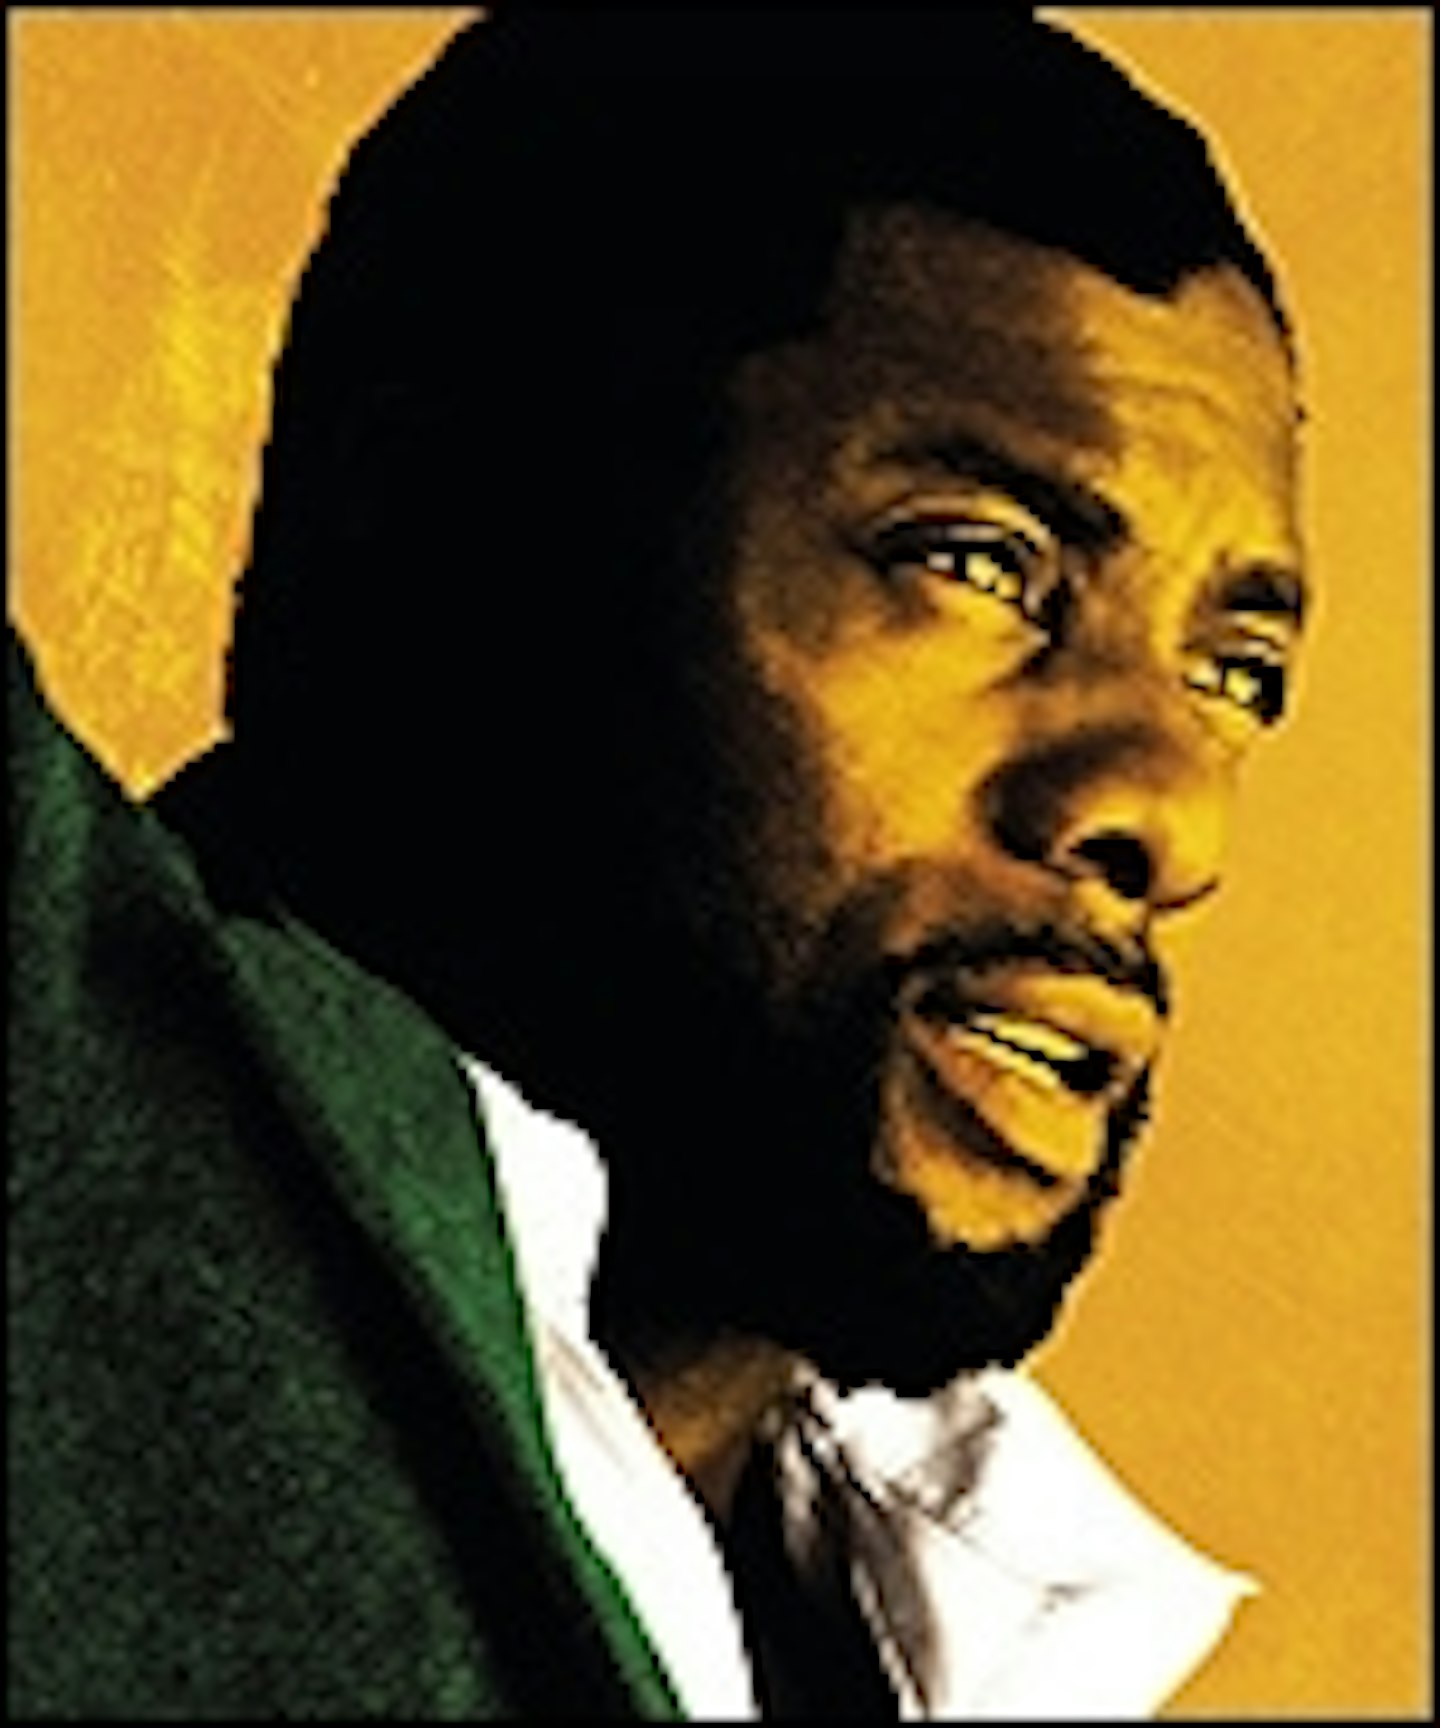 Two New Posters For Mandela: Long Walk To Freedom